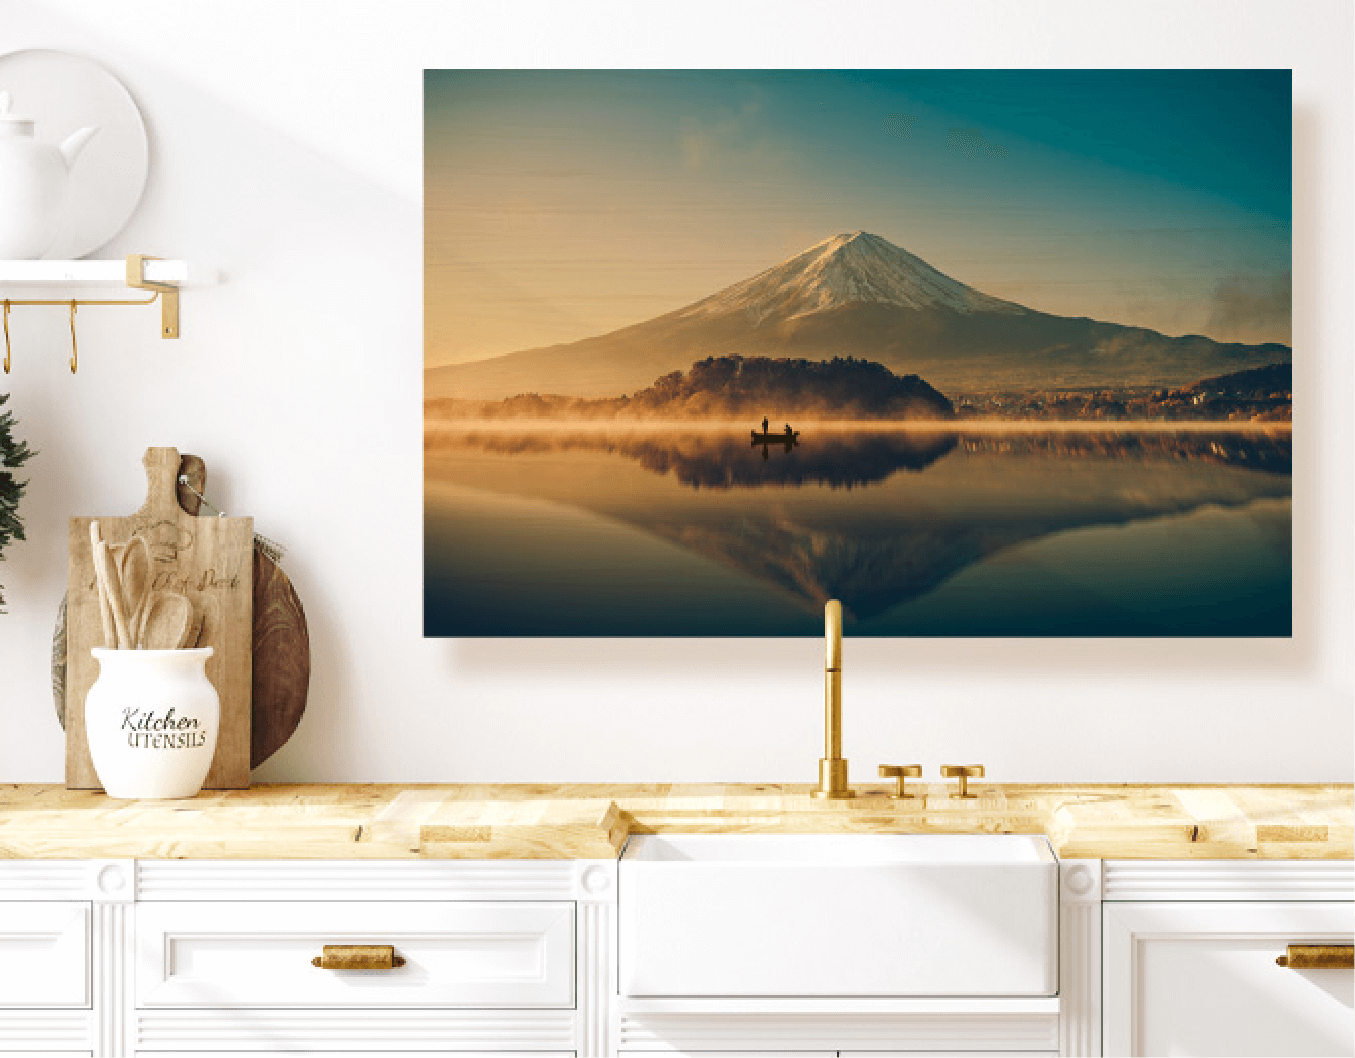 Picture of a mountain reflecting on a lake is hung on the wall behind a kitchen sink, canister of kitchen utensils displayed on the counter